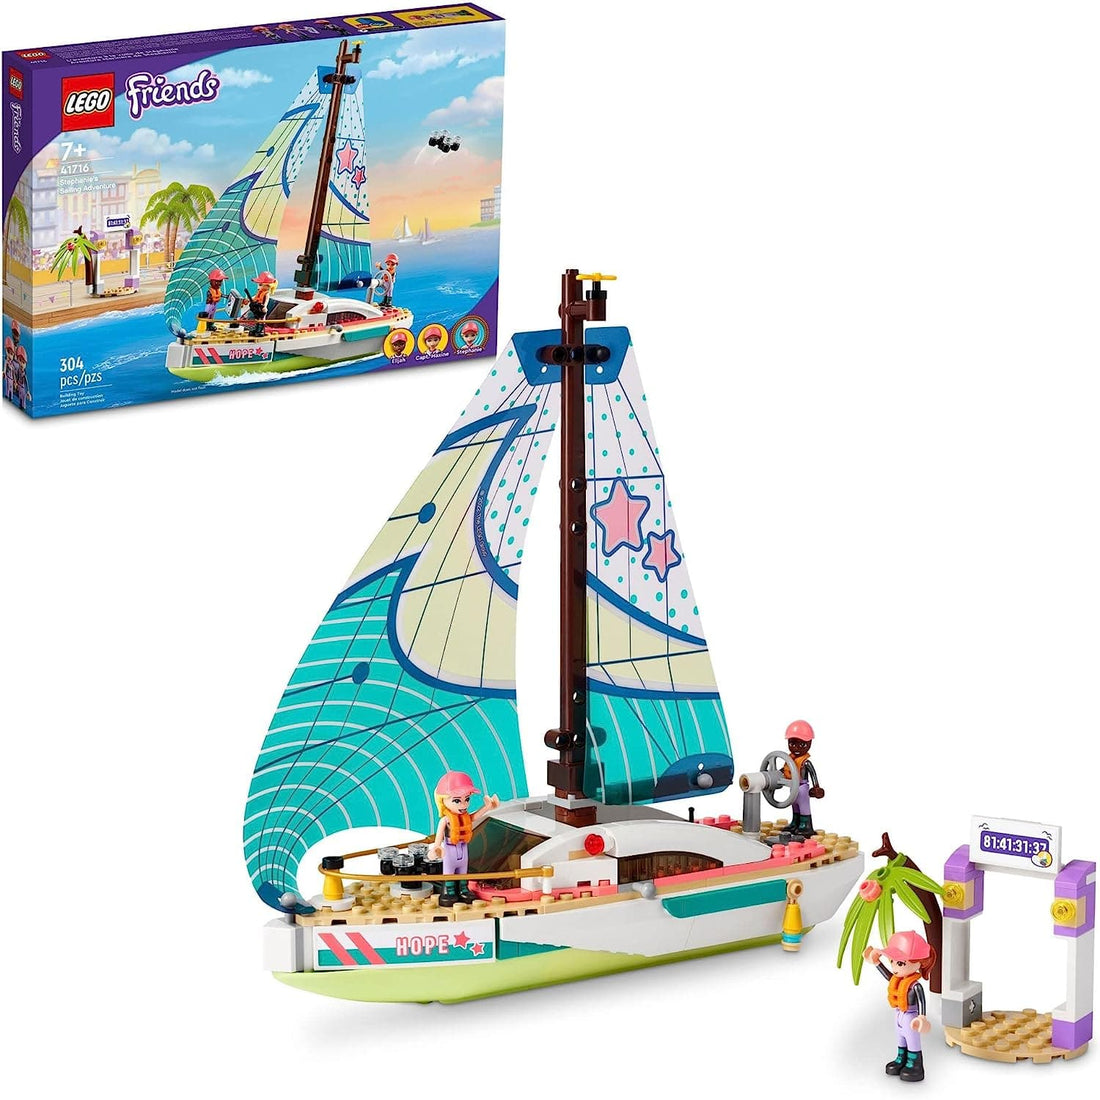 LEGO Friends Stephanie's Sailing Adventure Toy Boat Set with Island, Drone, and 3 Mini Figures - best price from Maltashopper.com 41716